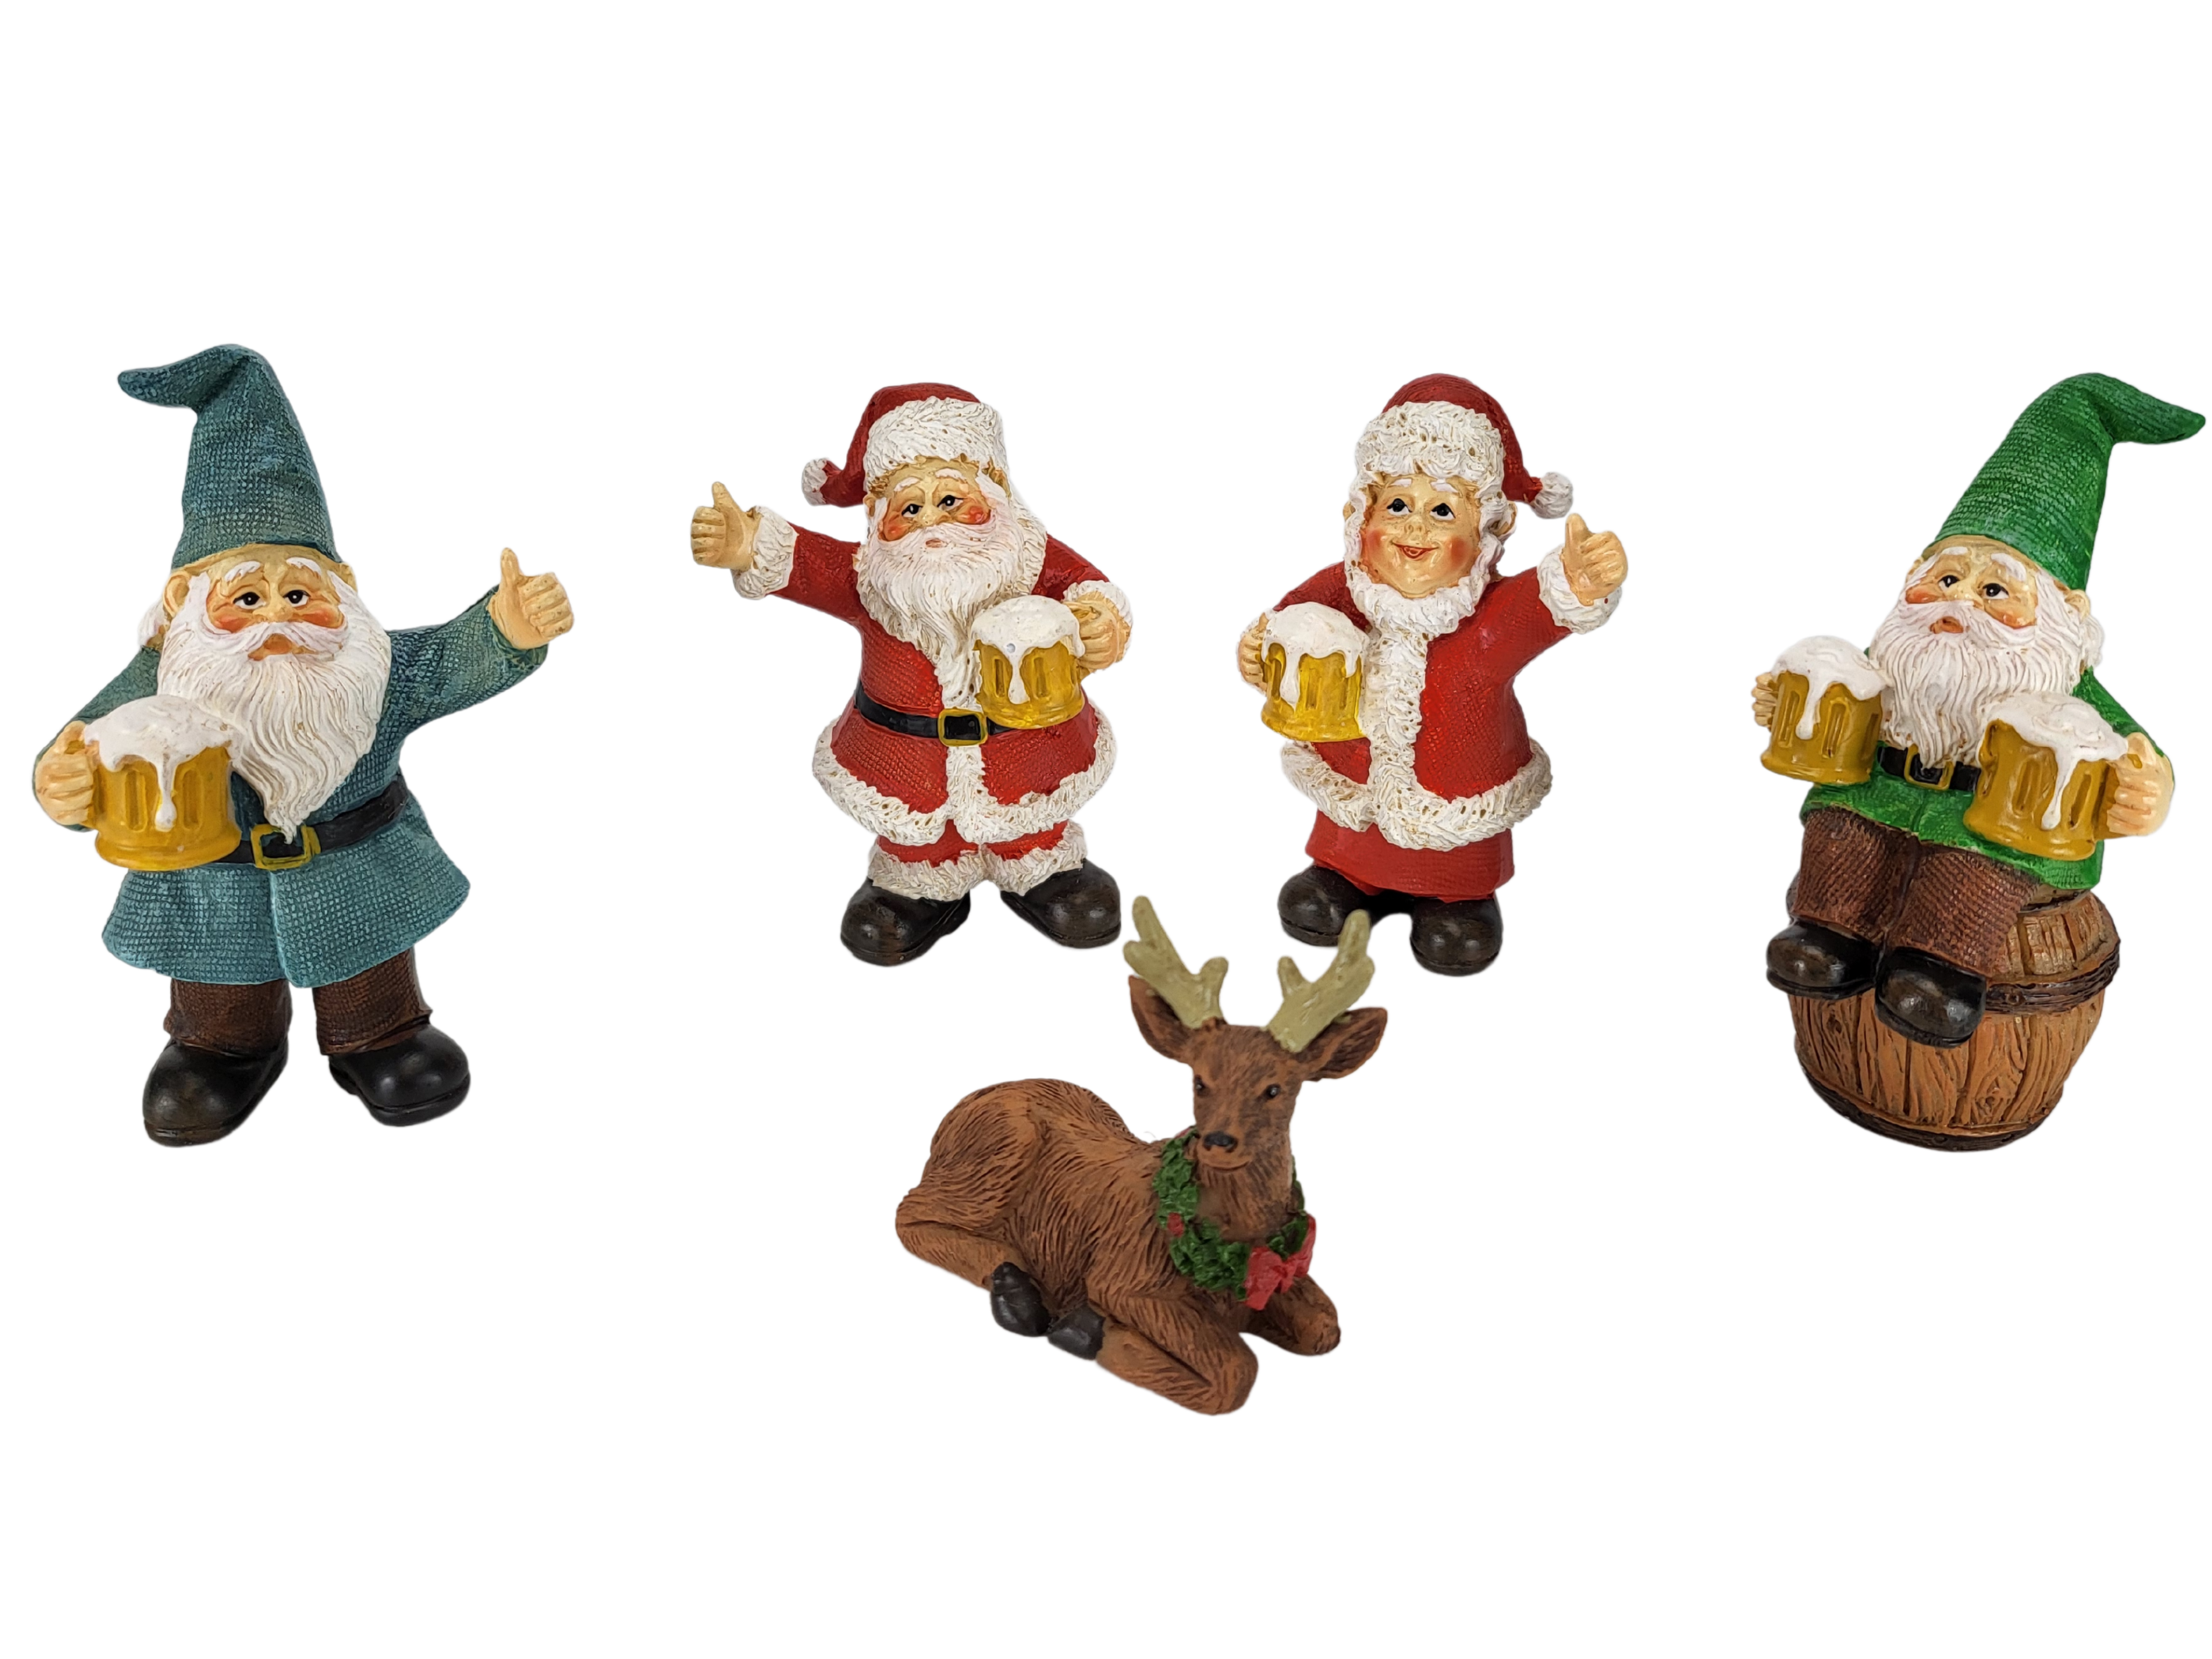 Beverage Buddy Gnome Figurine 10015552 – Baubles-N-Bling